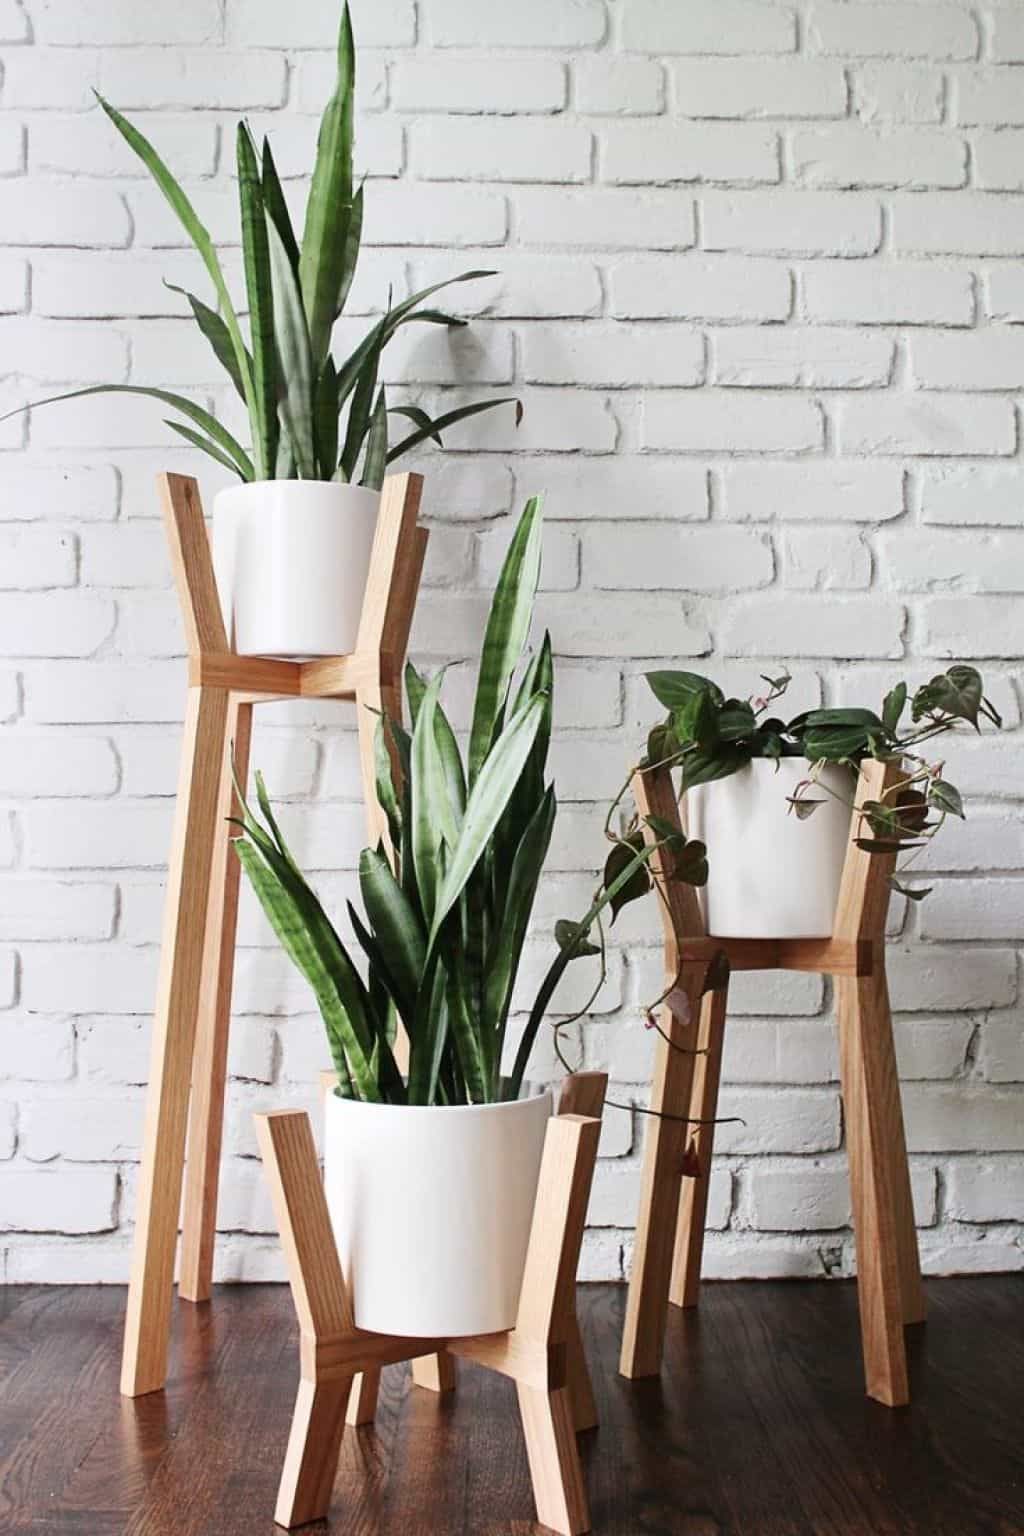 13 pidestall plants Stand ideas